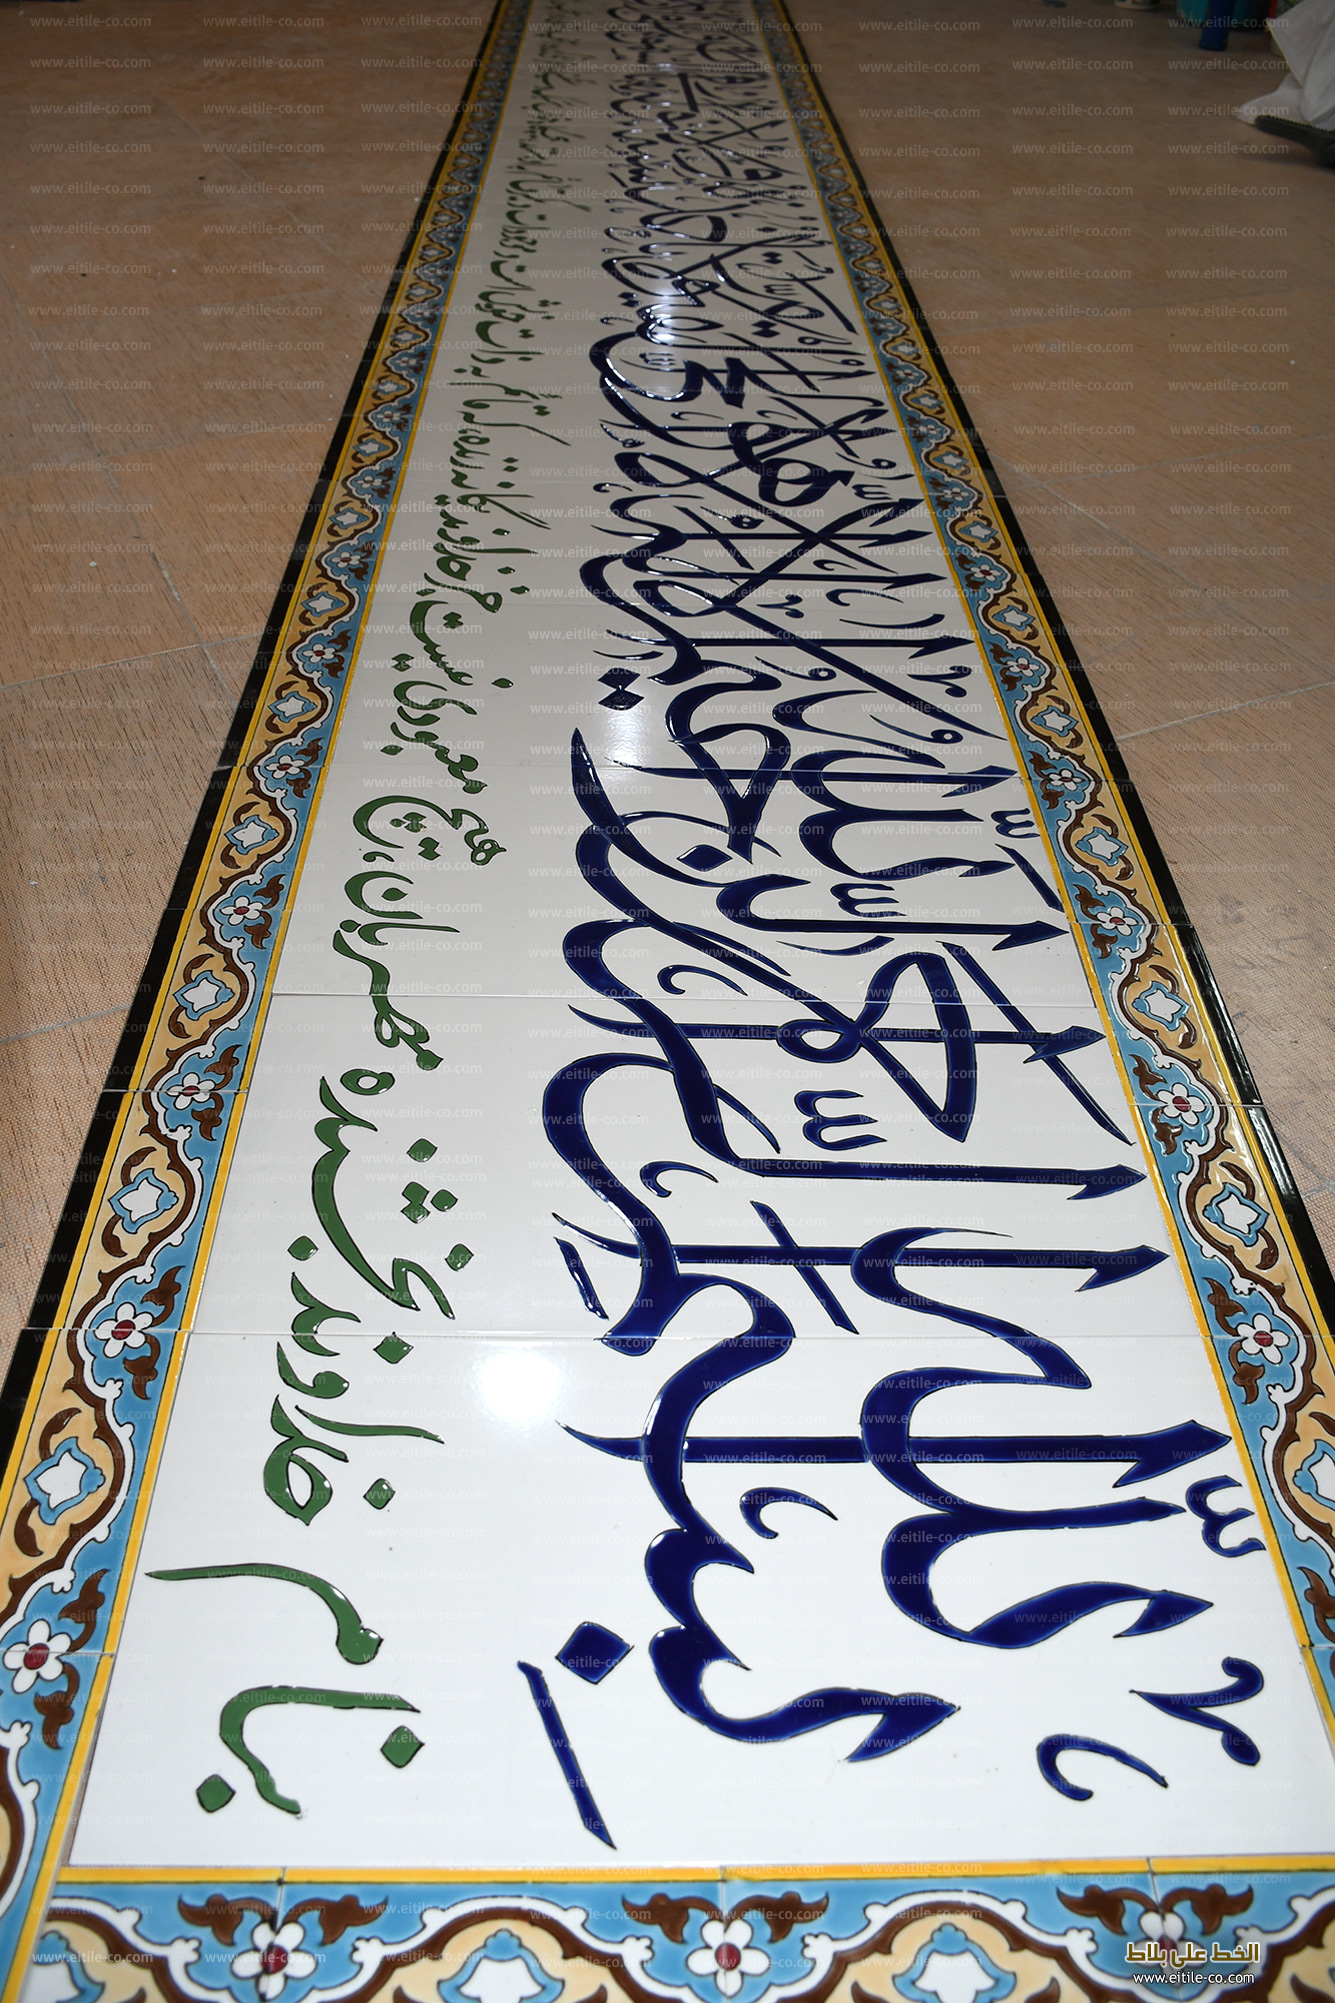 Supplier of tiles with Islamic calligraphy, www.eitile-co.com